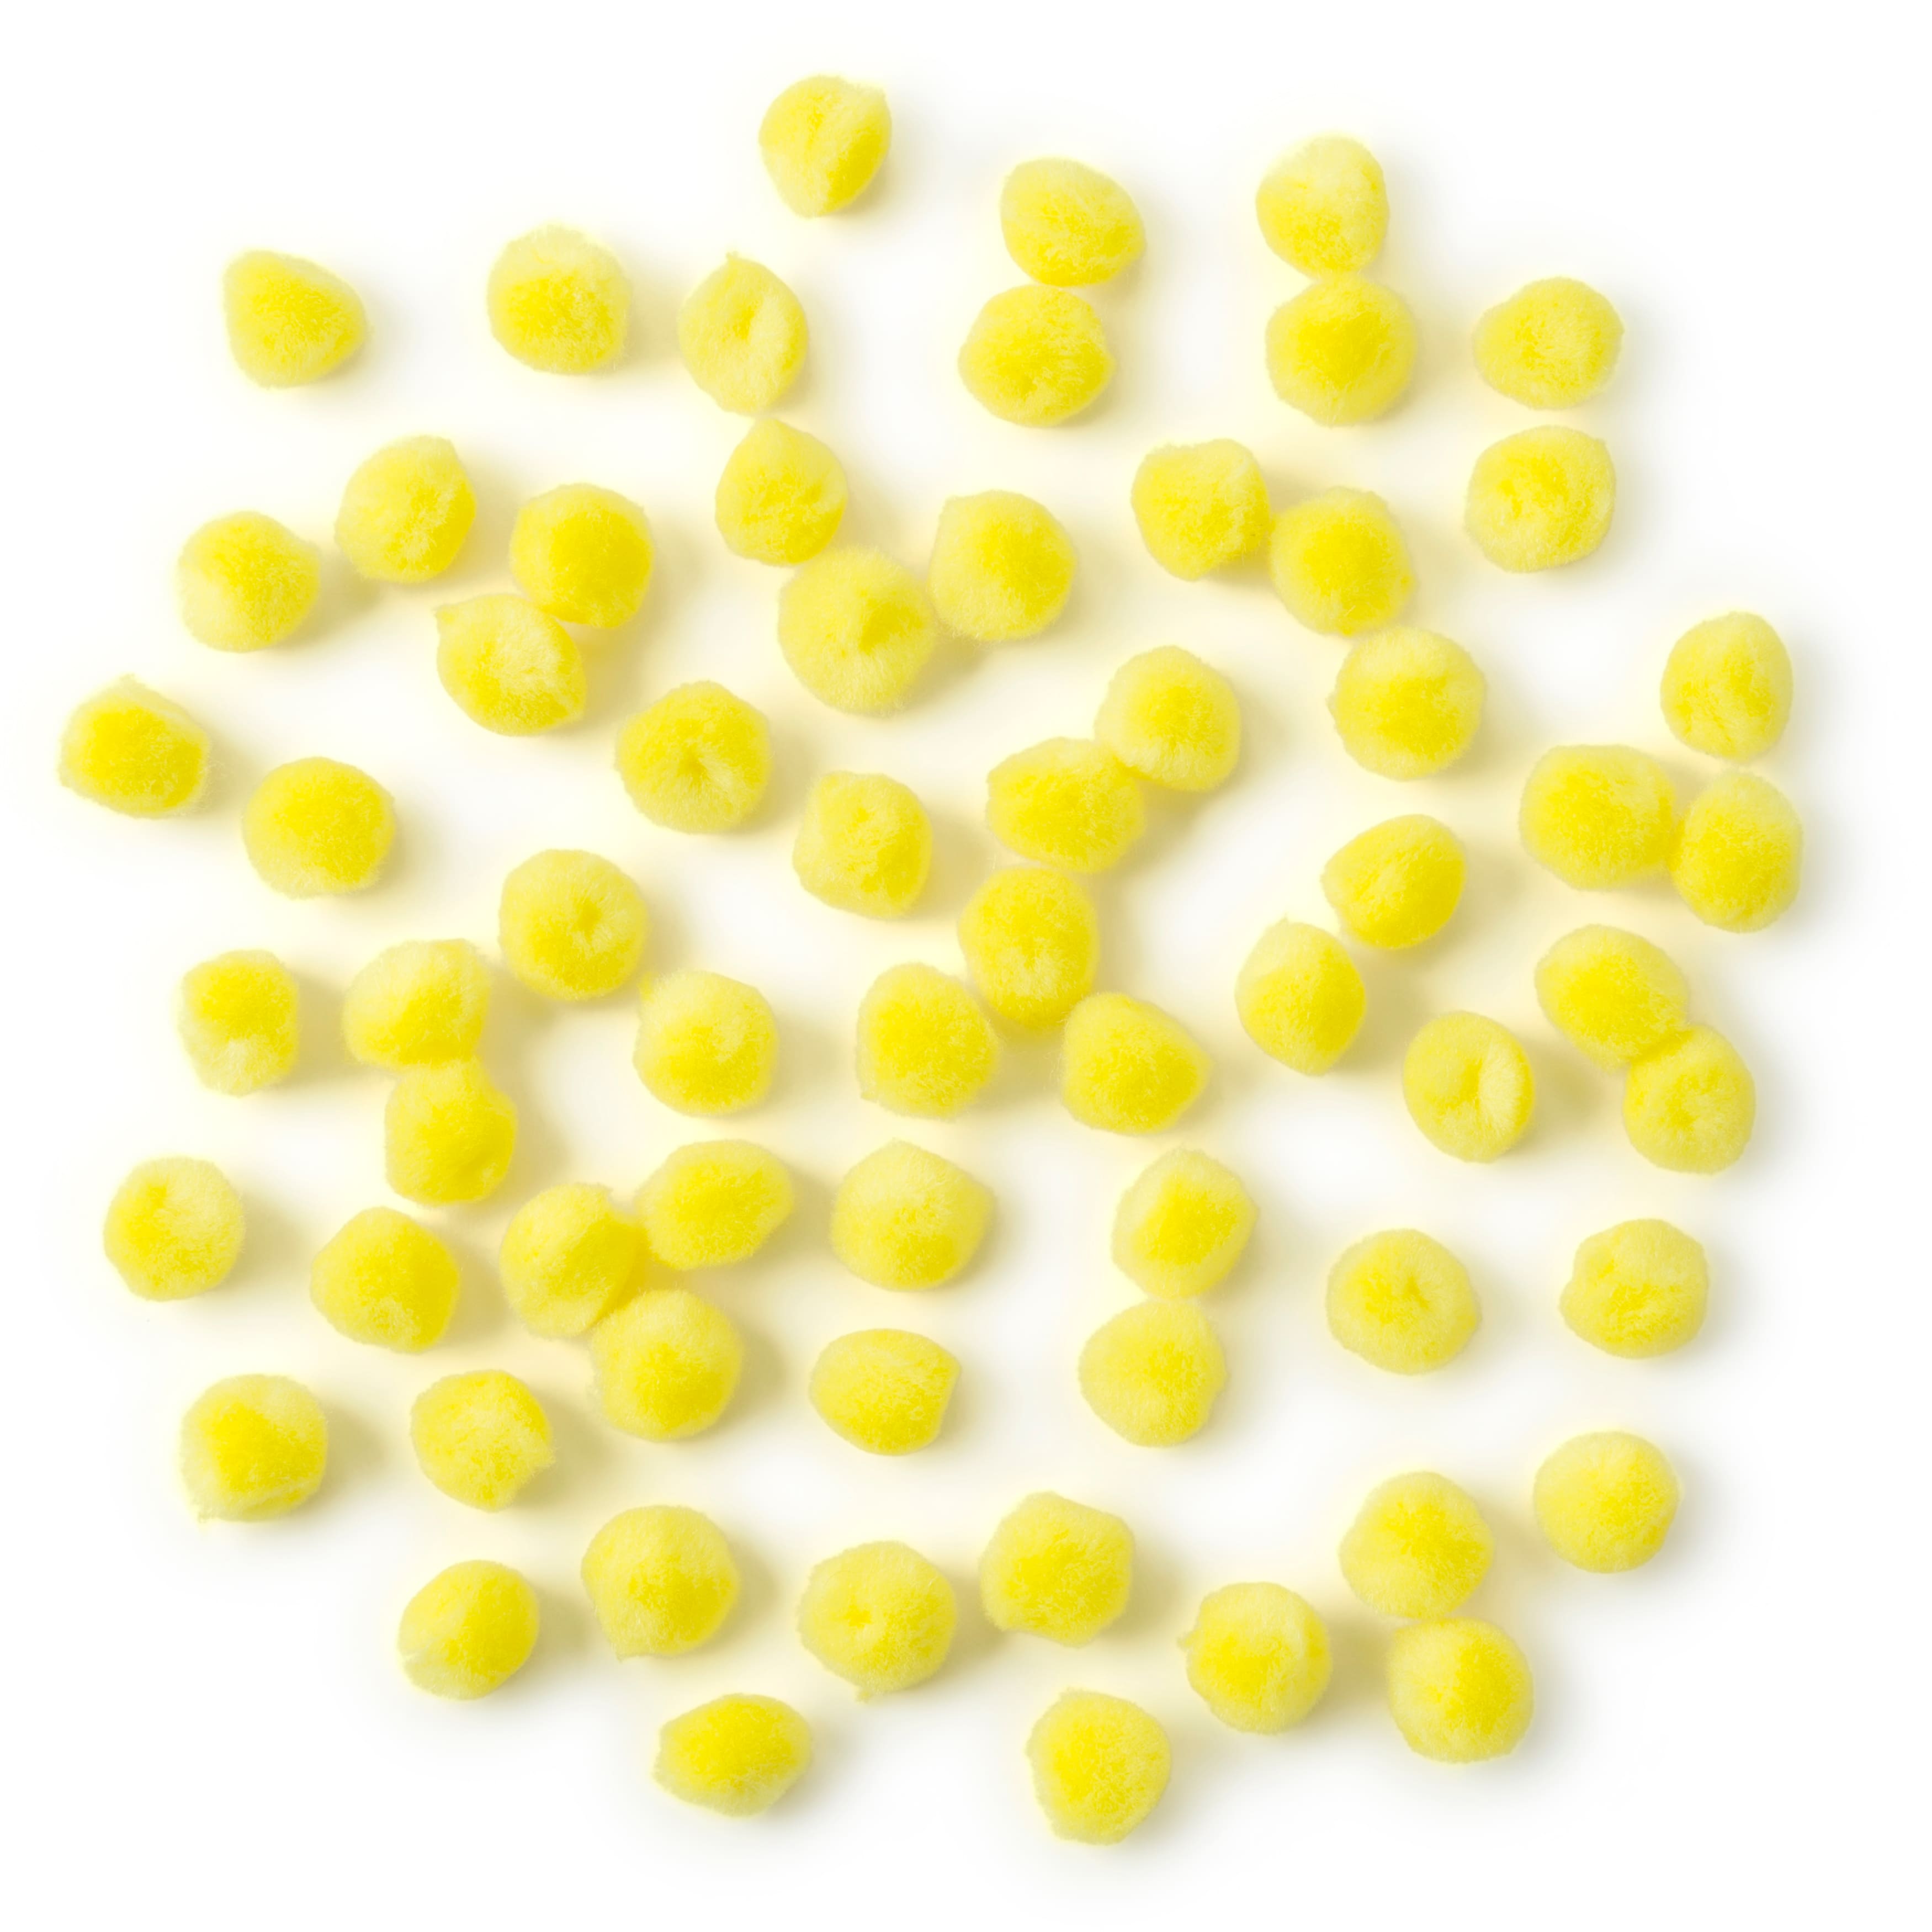 0.5 inch Yellow Tiny Craft Pom Poms 100 Pieces, Size: Large